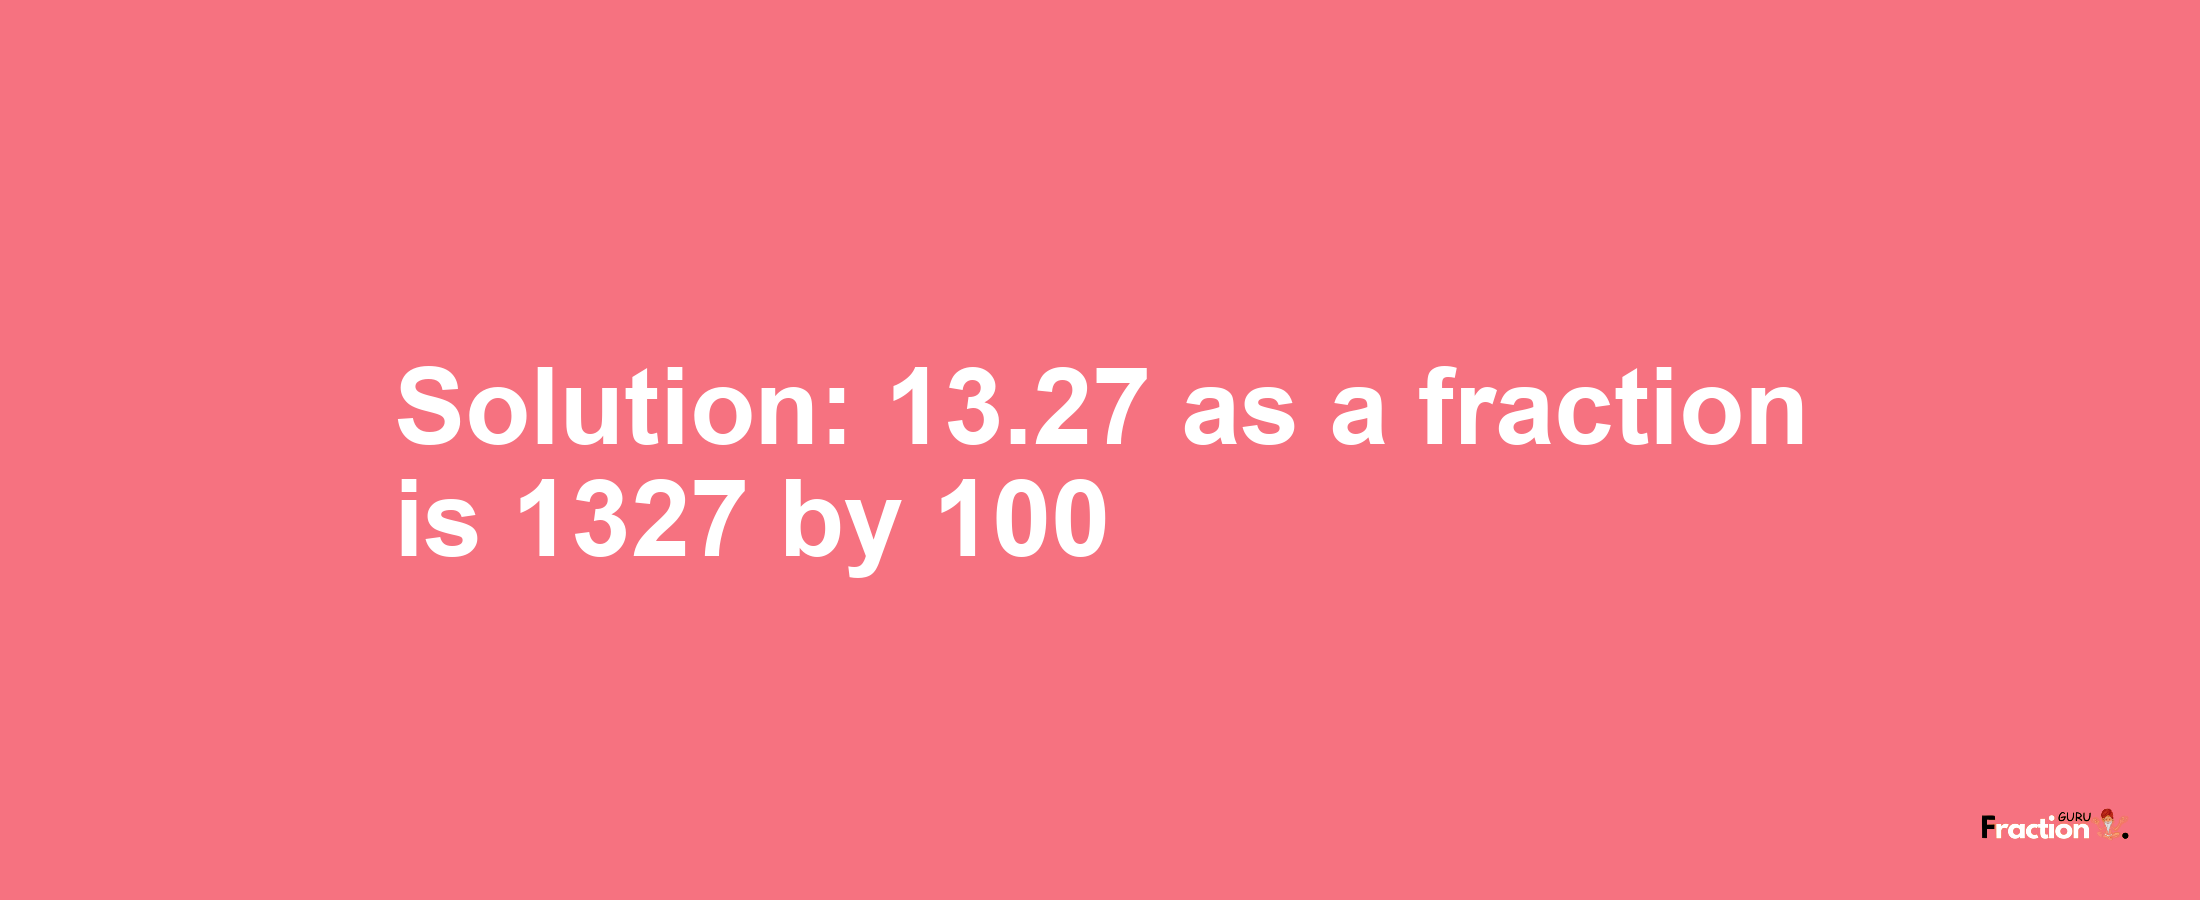 Solution:13.27 as a fraction is 1327/100